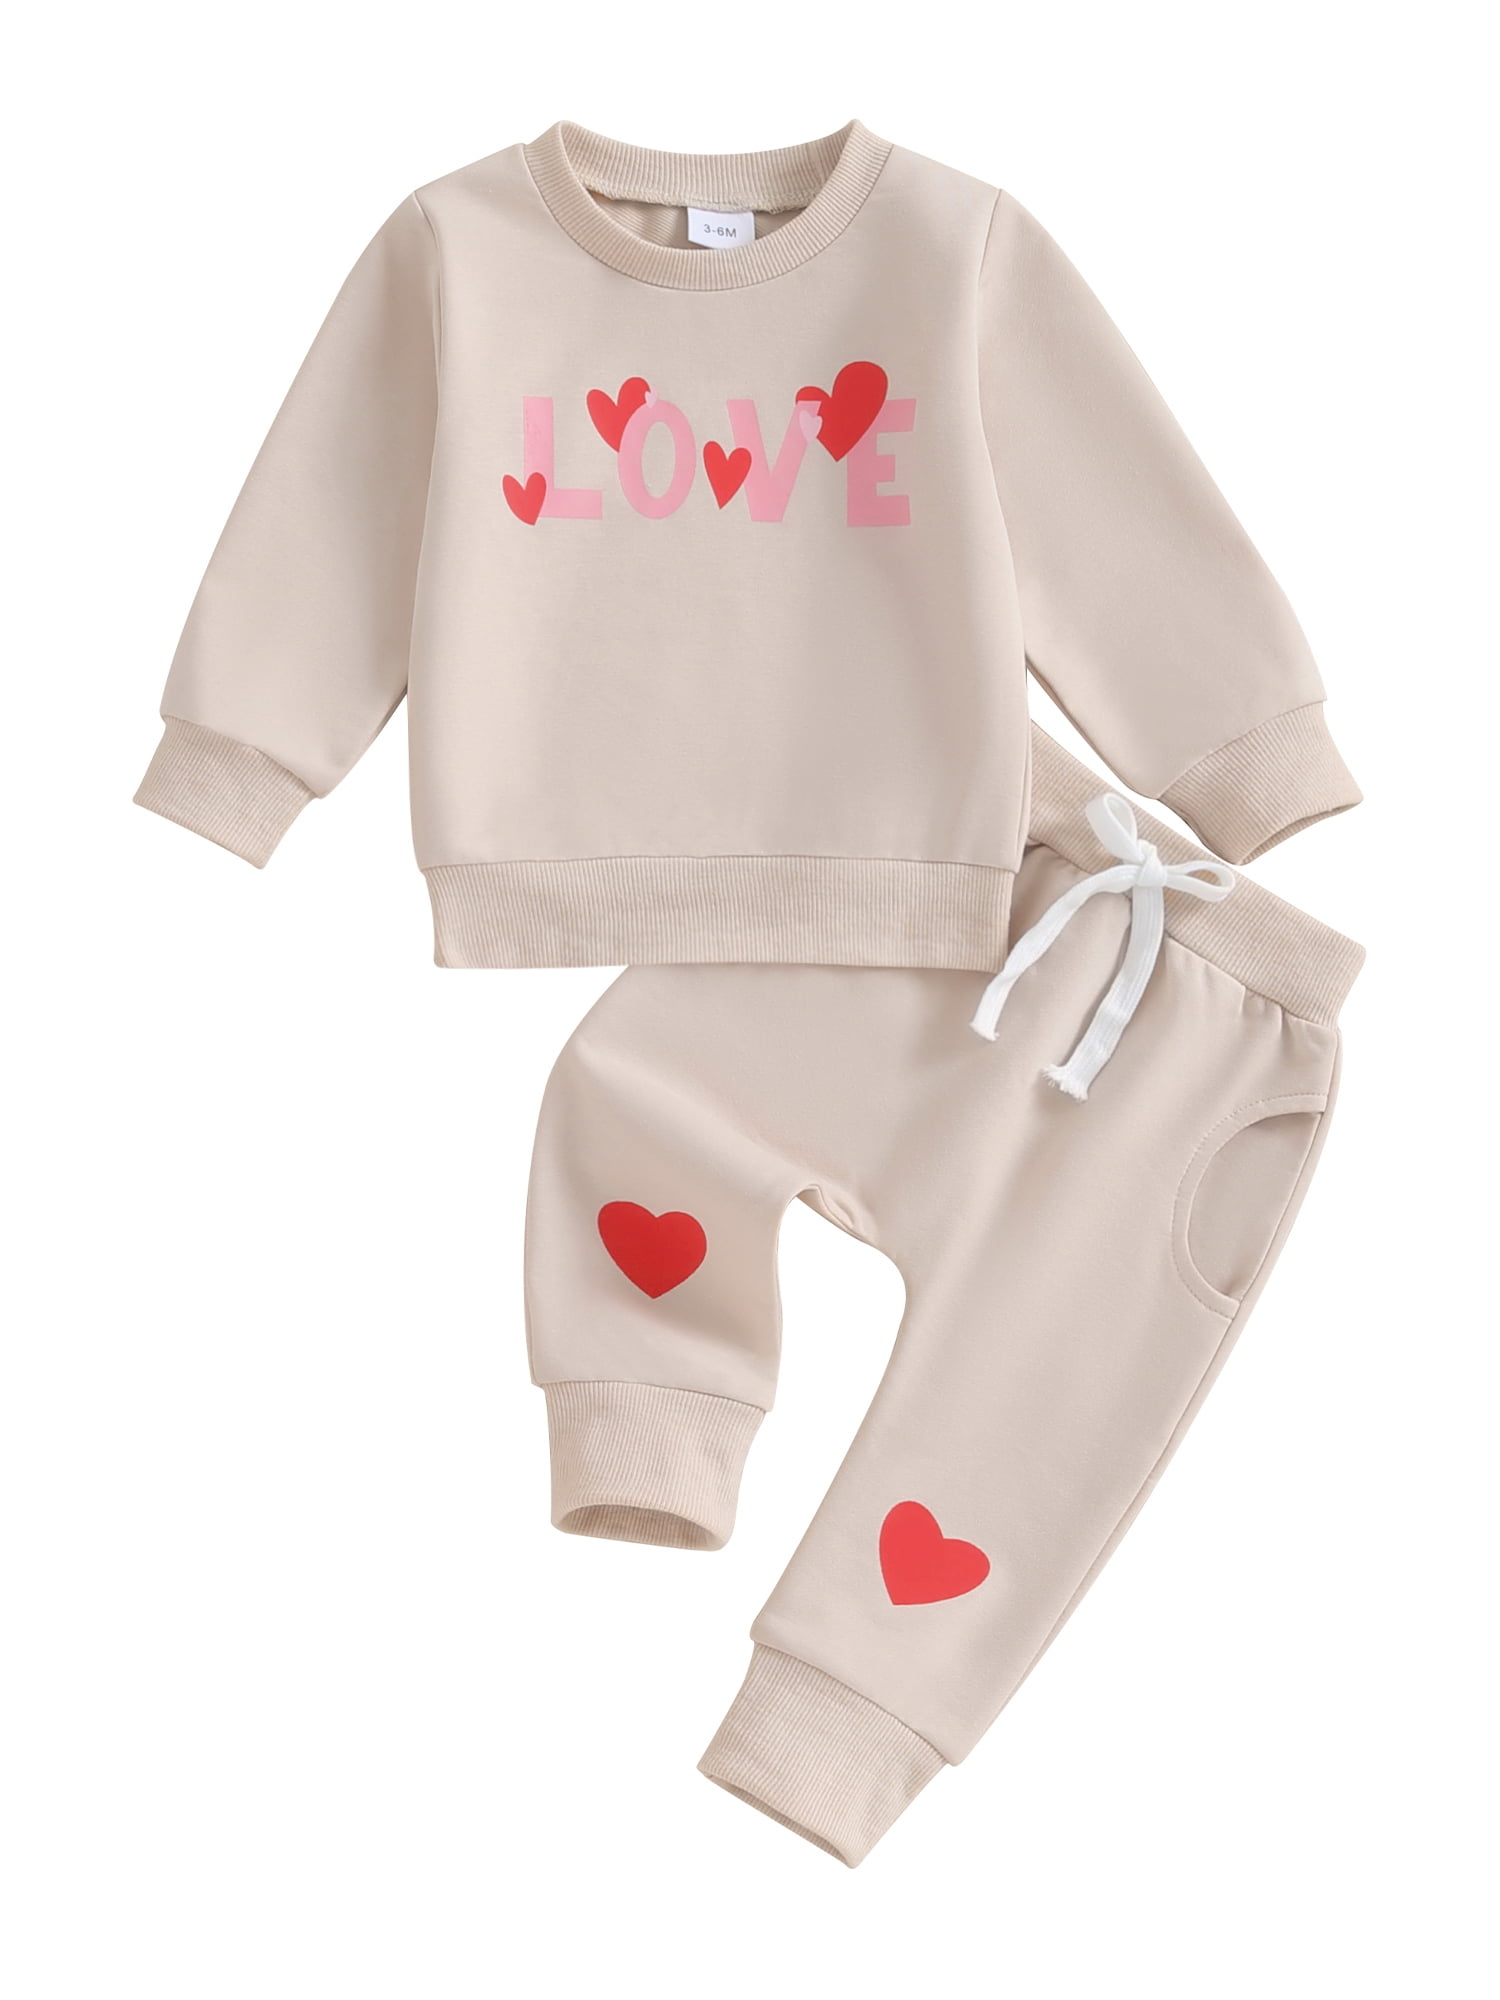 Toddler Baby Boy Girl Valentines Day Outfit Love Sweatshirt Pants Set ...